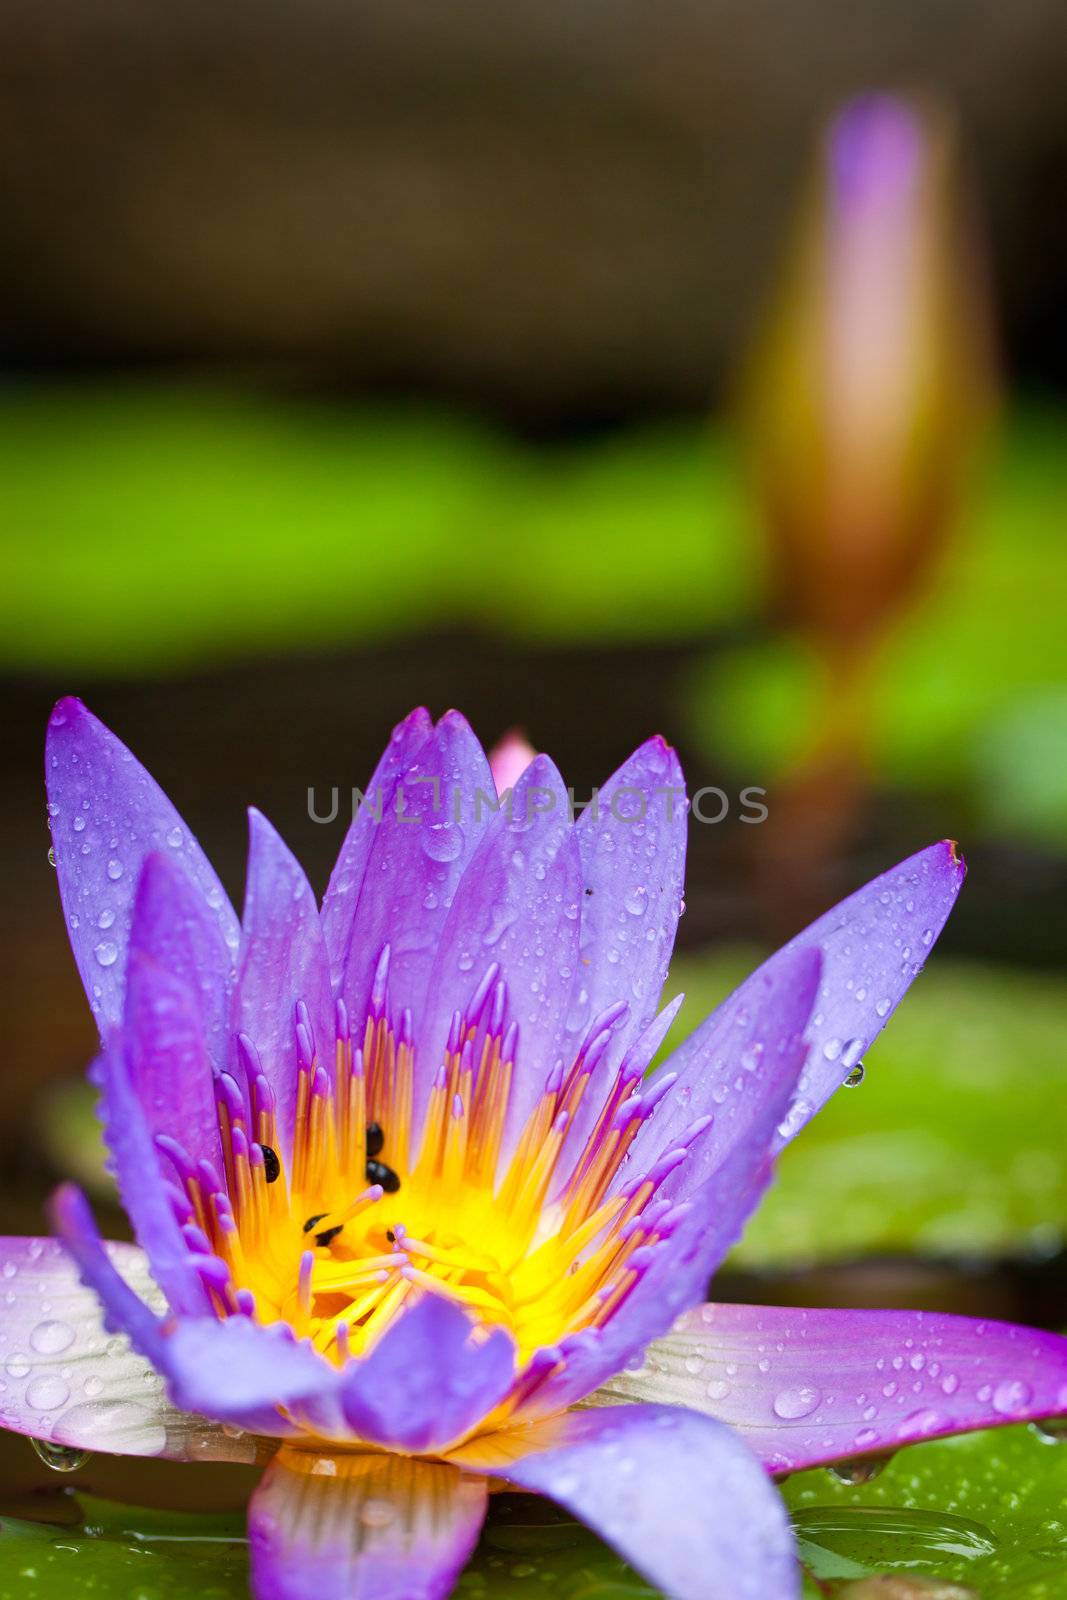 A closeup shot of  beautiful lotus flowers or waterlilies with lush green leaves in a pond